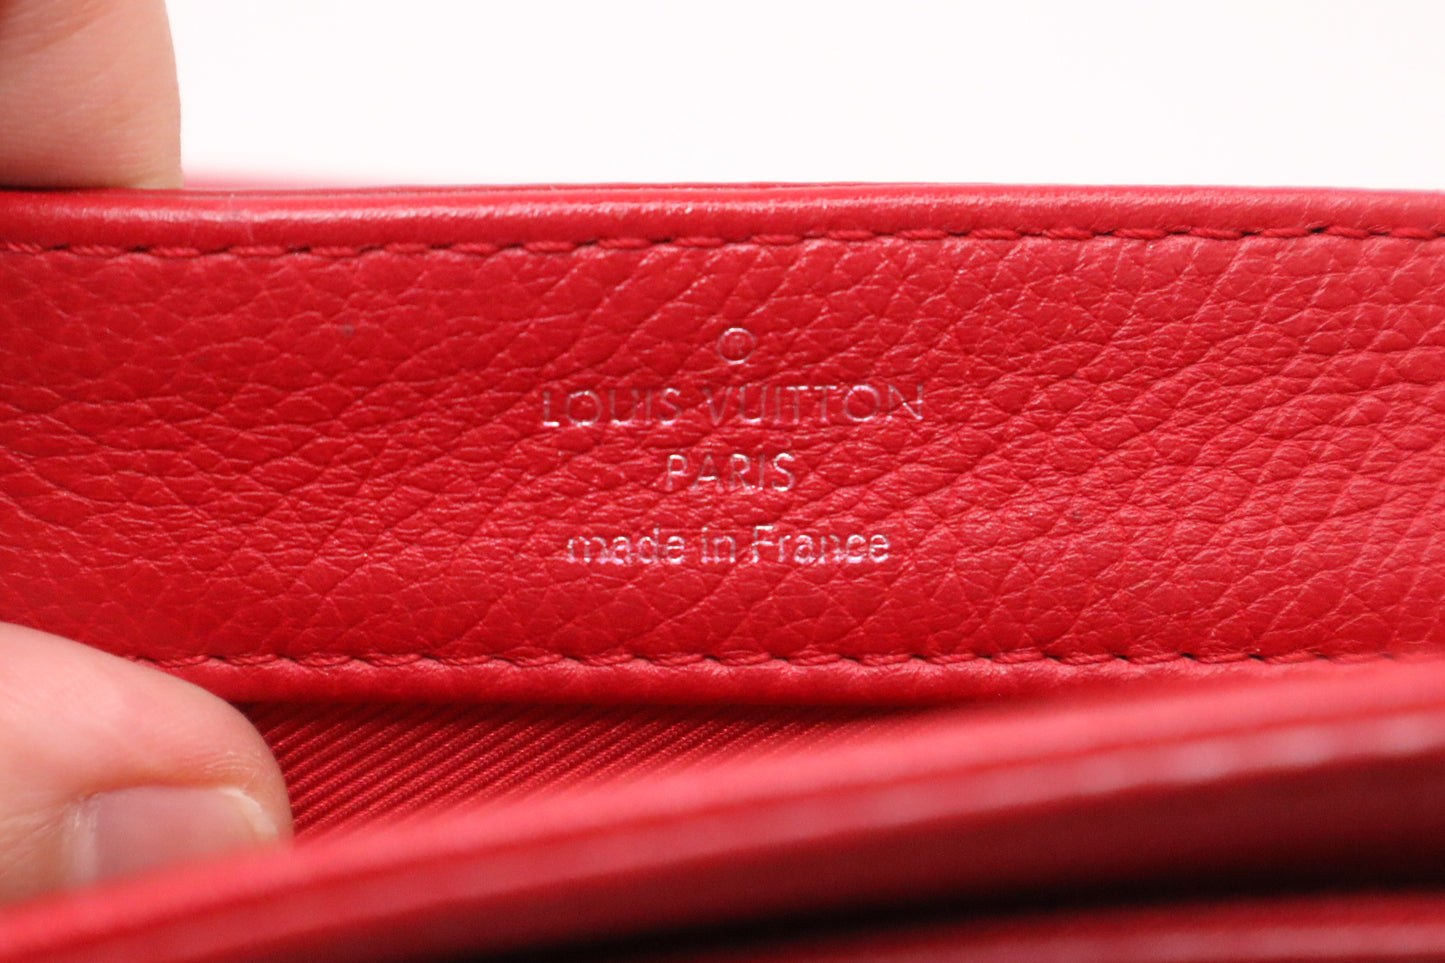 Louis Vuitton Lockme II BB in Red Leather